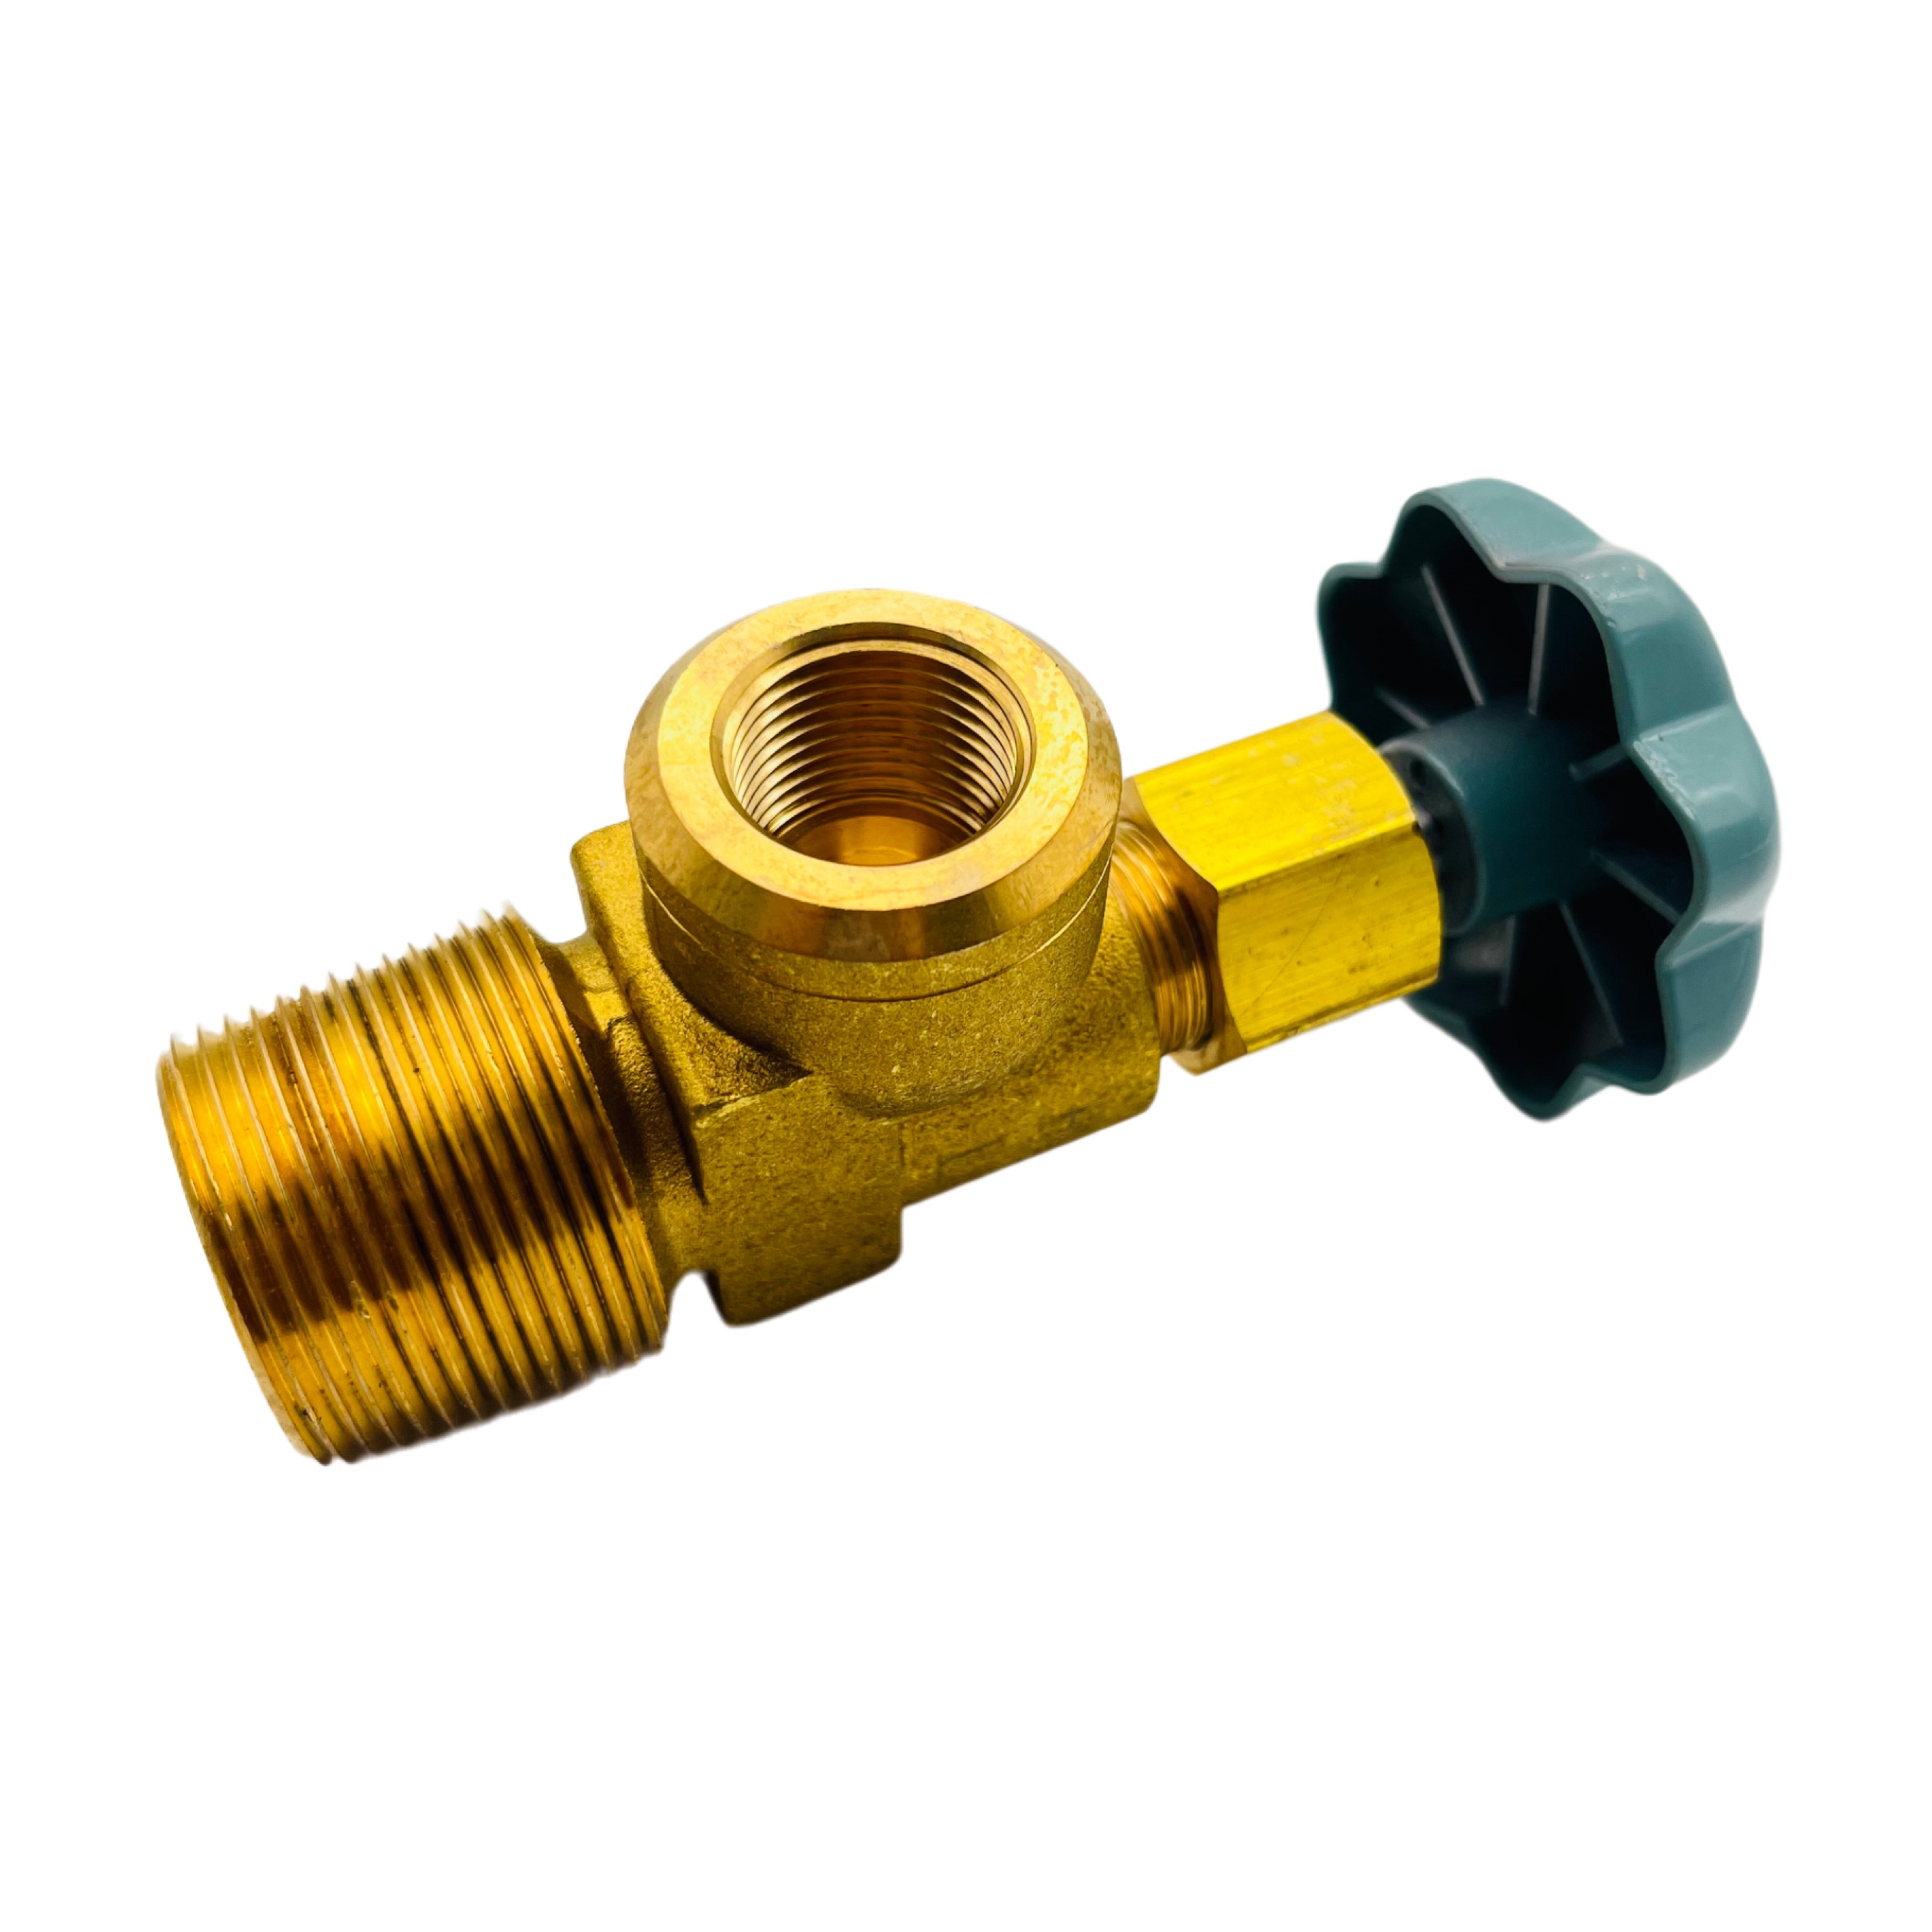 PF5-1 Shaft Coupling Type Brass Acetylene Cylinder Valve from